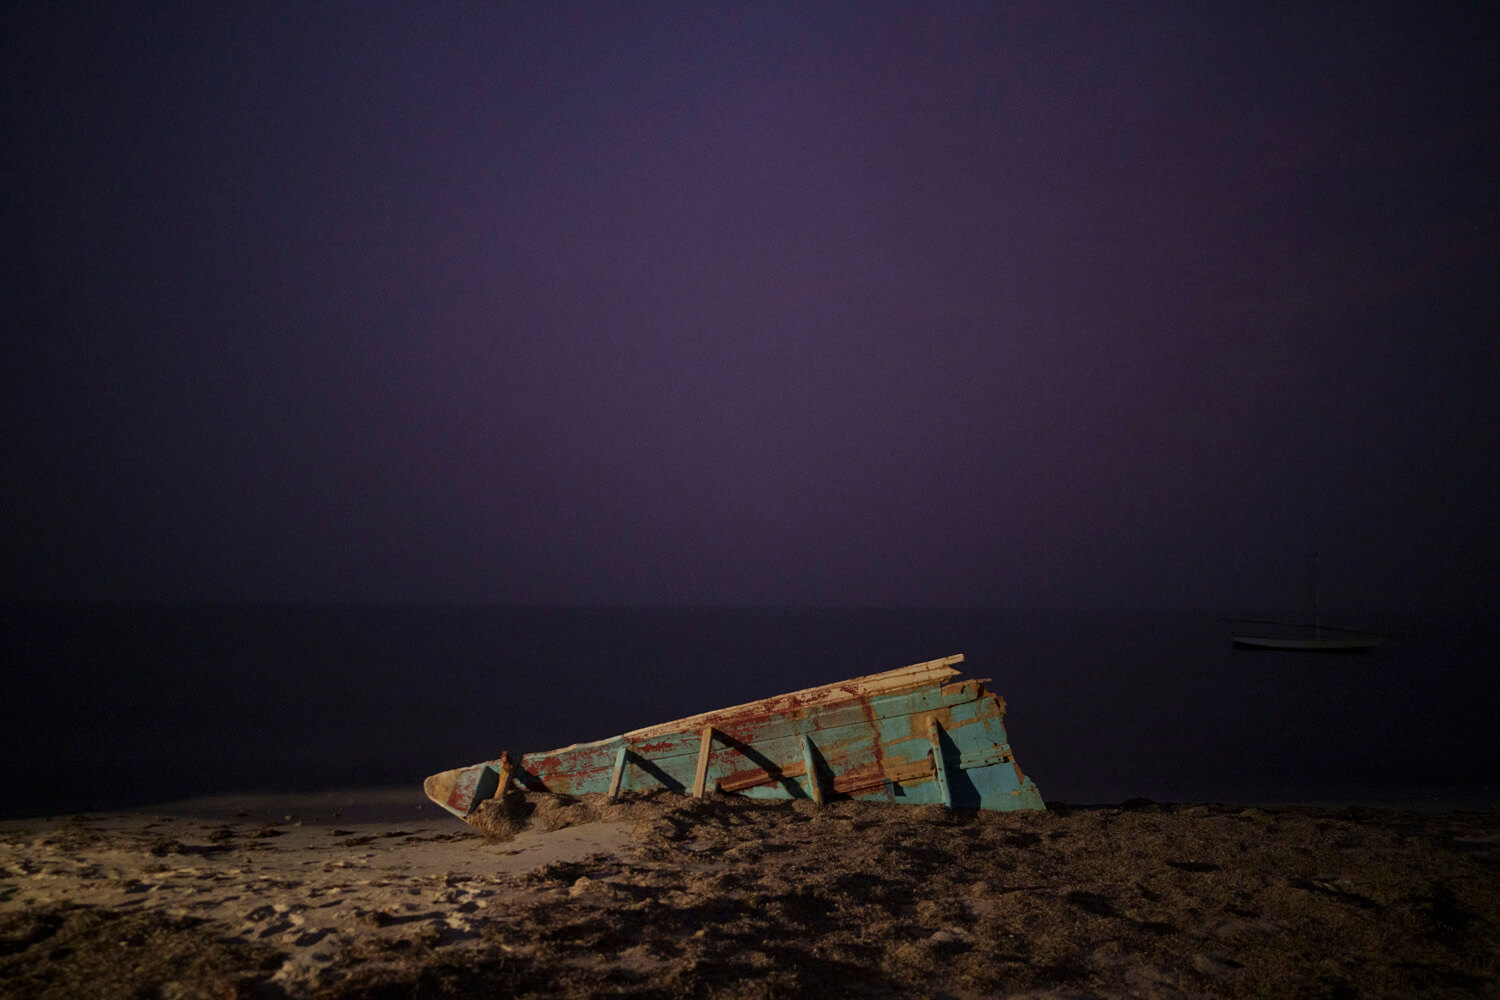 A derelict boat rests on a sandy beach under a twilight sky, symbolizing stillness and abandonment in a marine landscape.